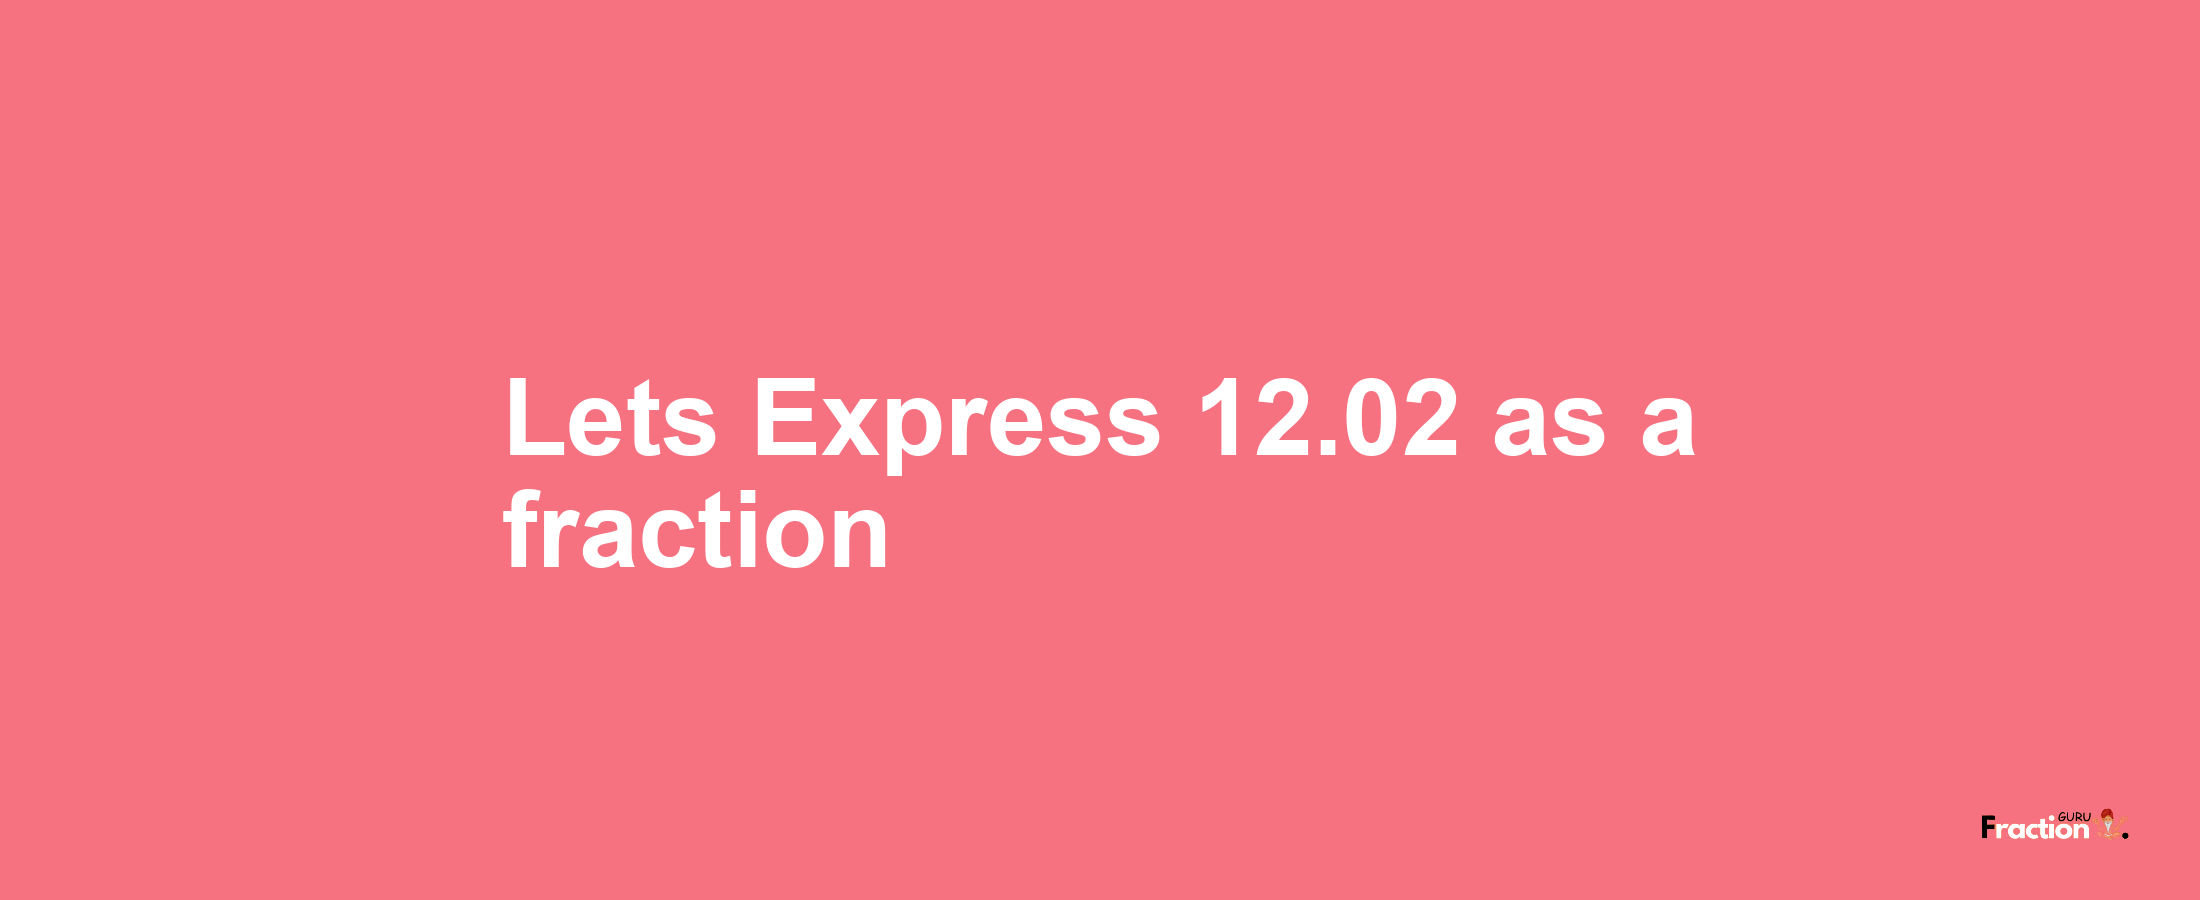 Lets Express 12.02 as afraction